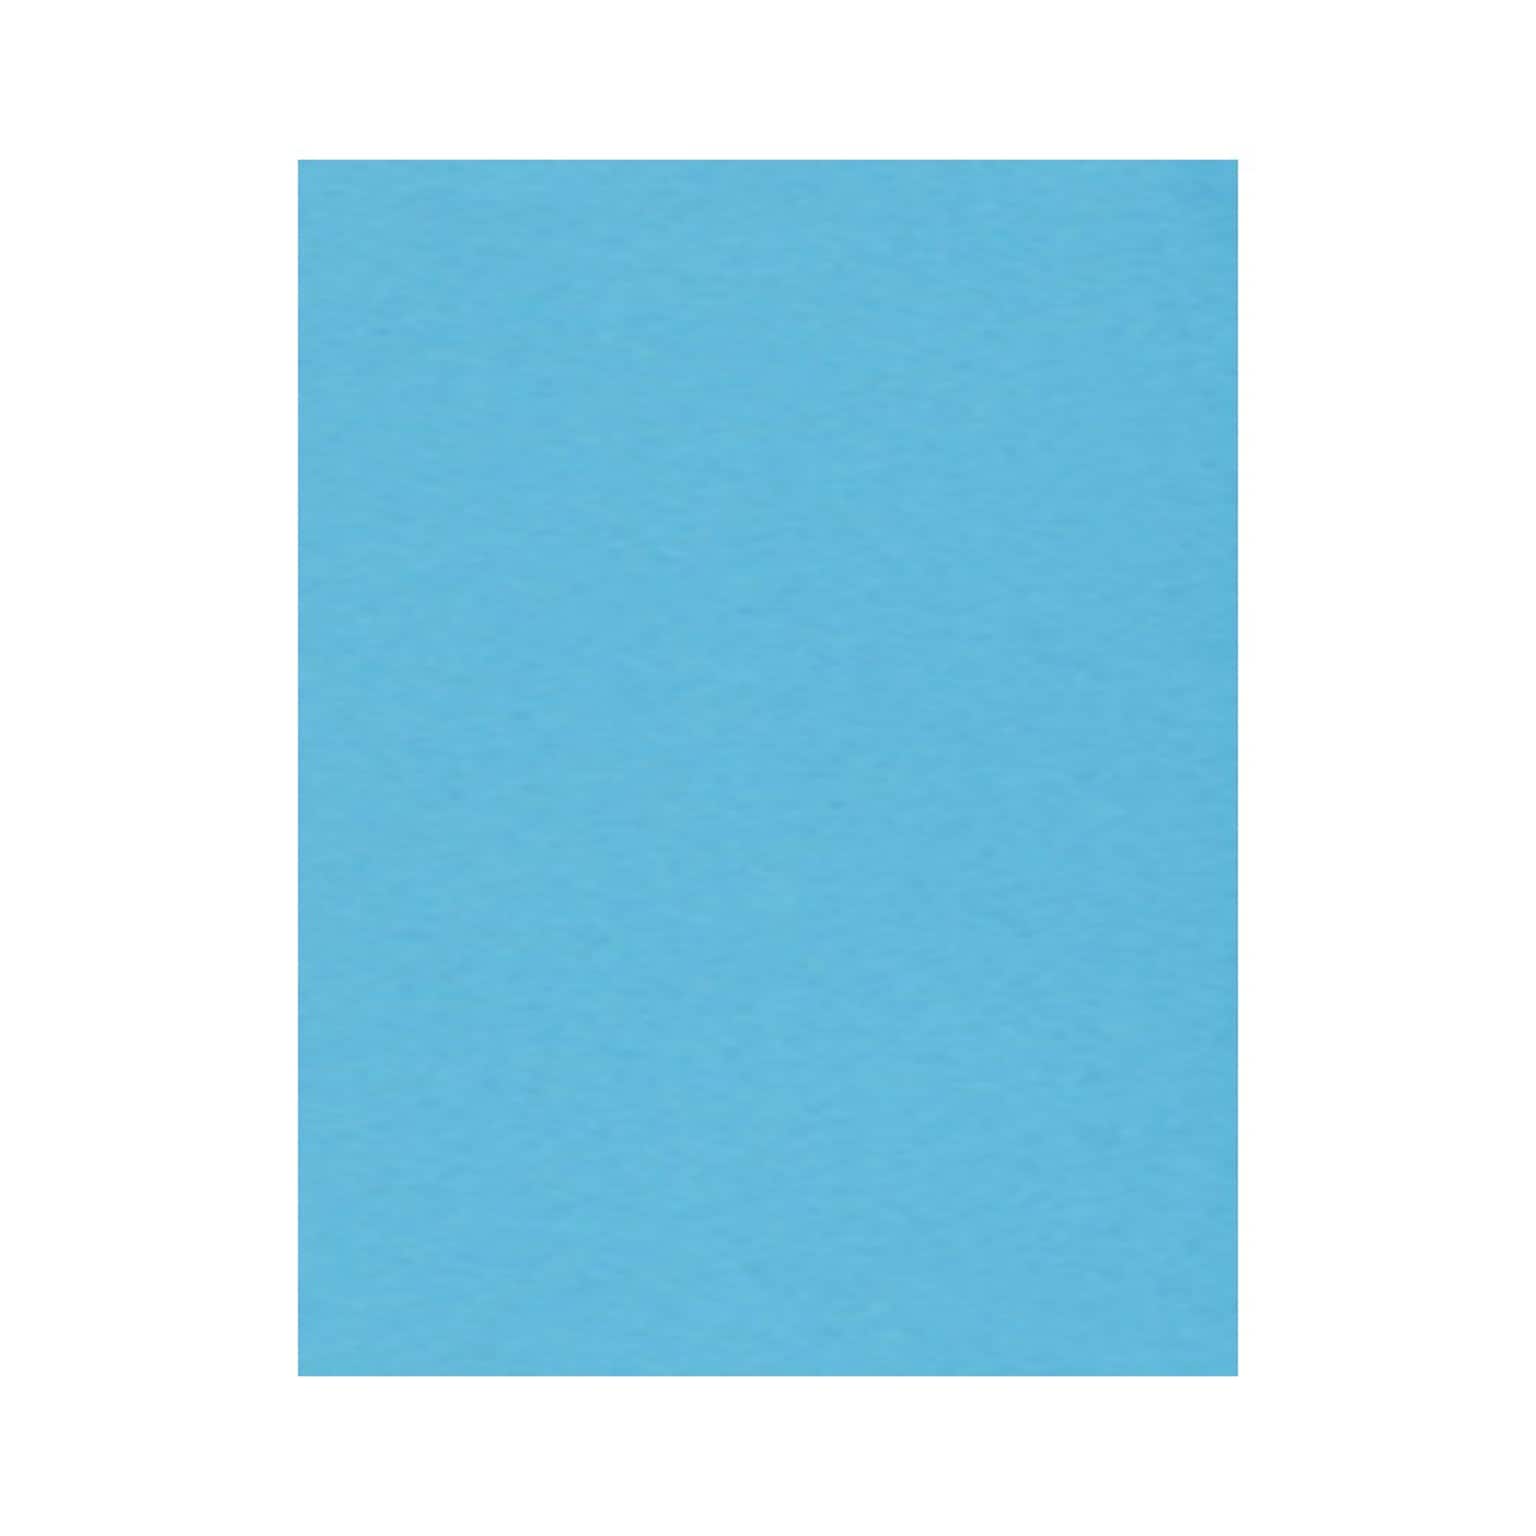 LUX Colored Paper, 8.5 x 11, Bright Blue 250 Sheets/Pack (81211-P-13-250)